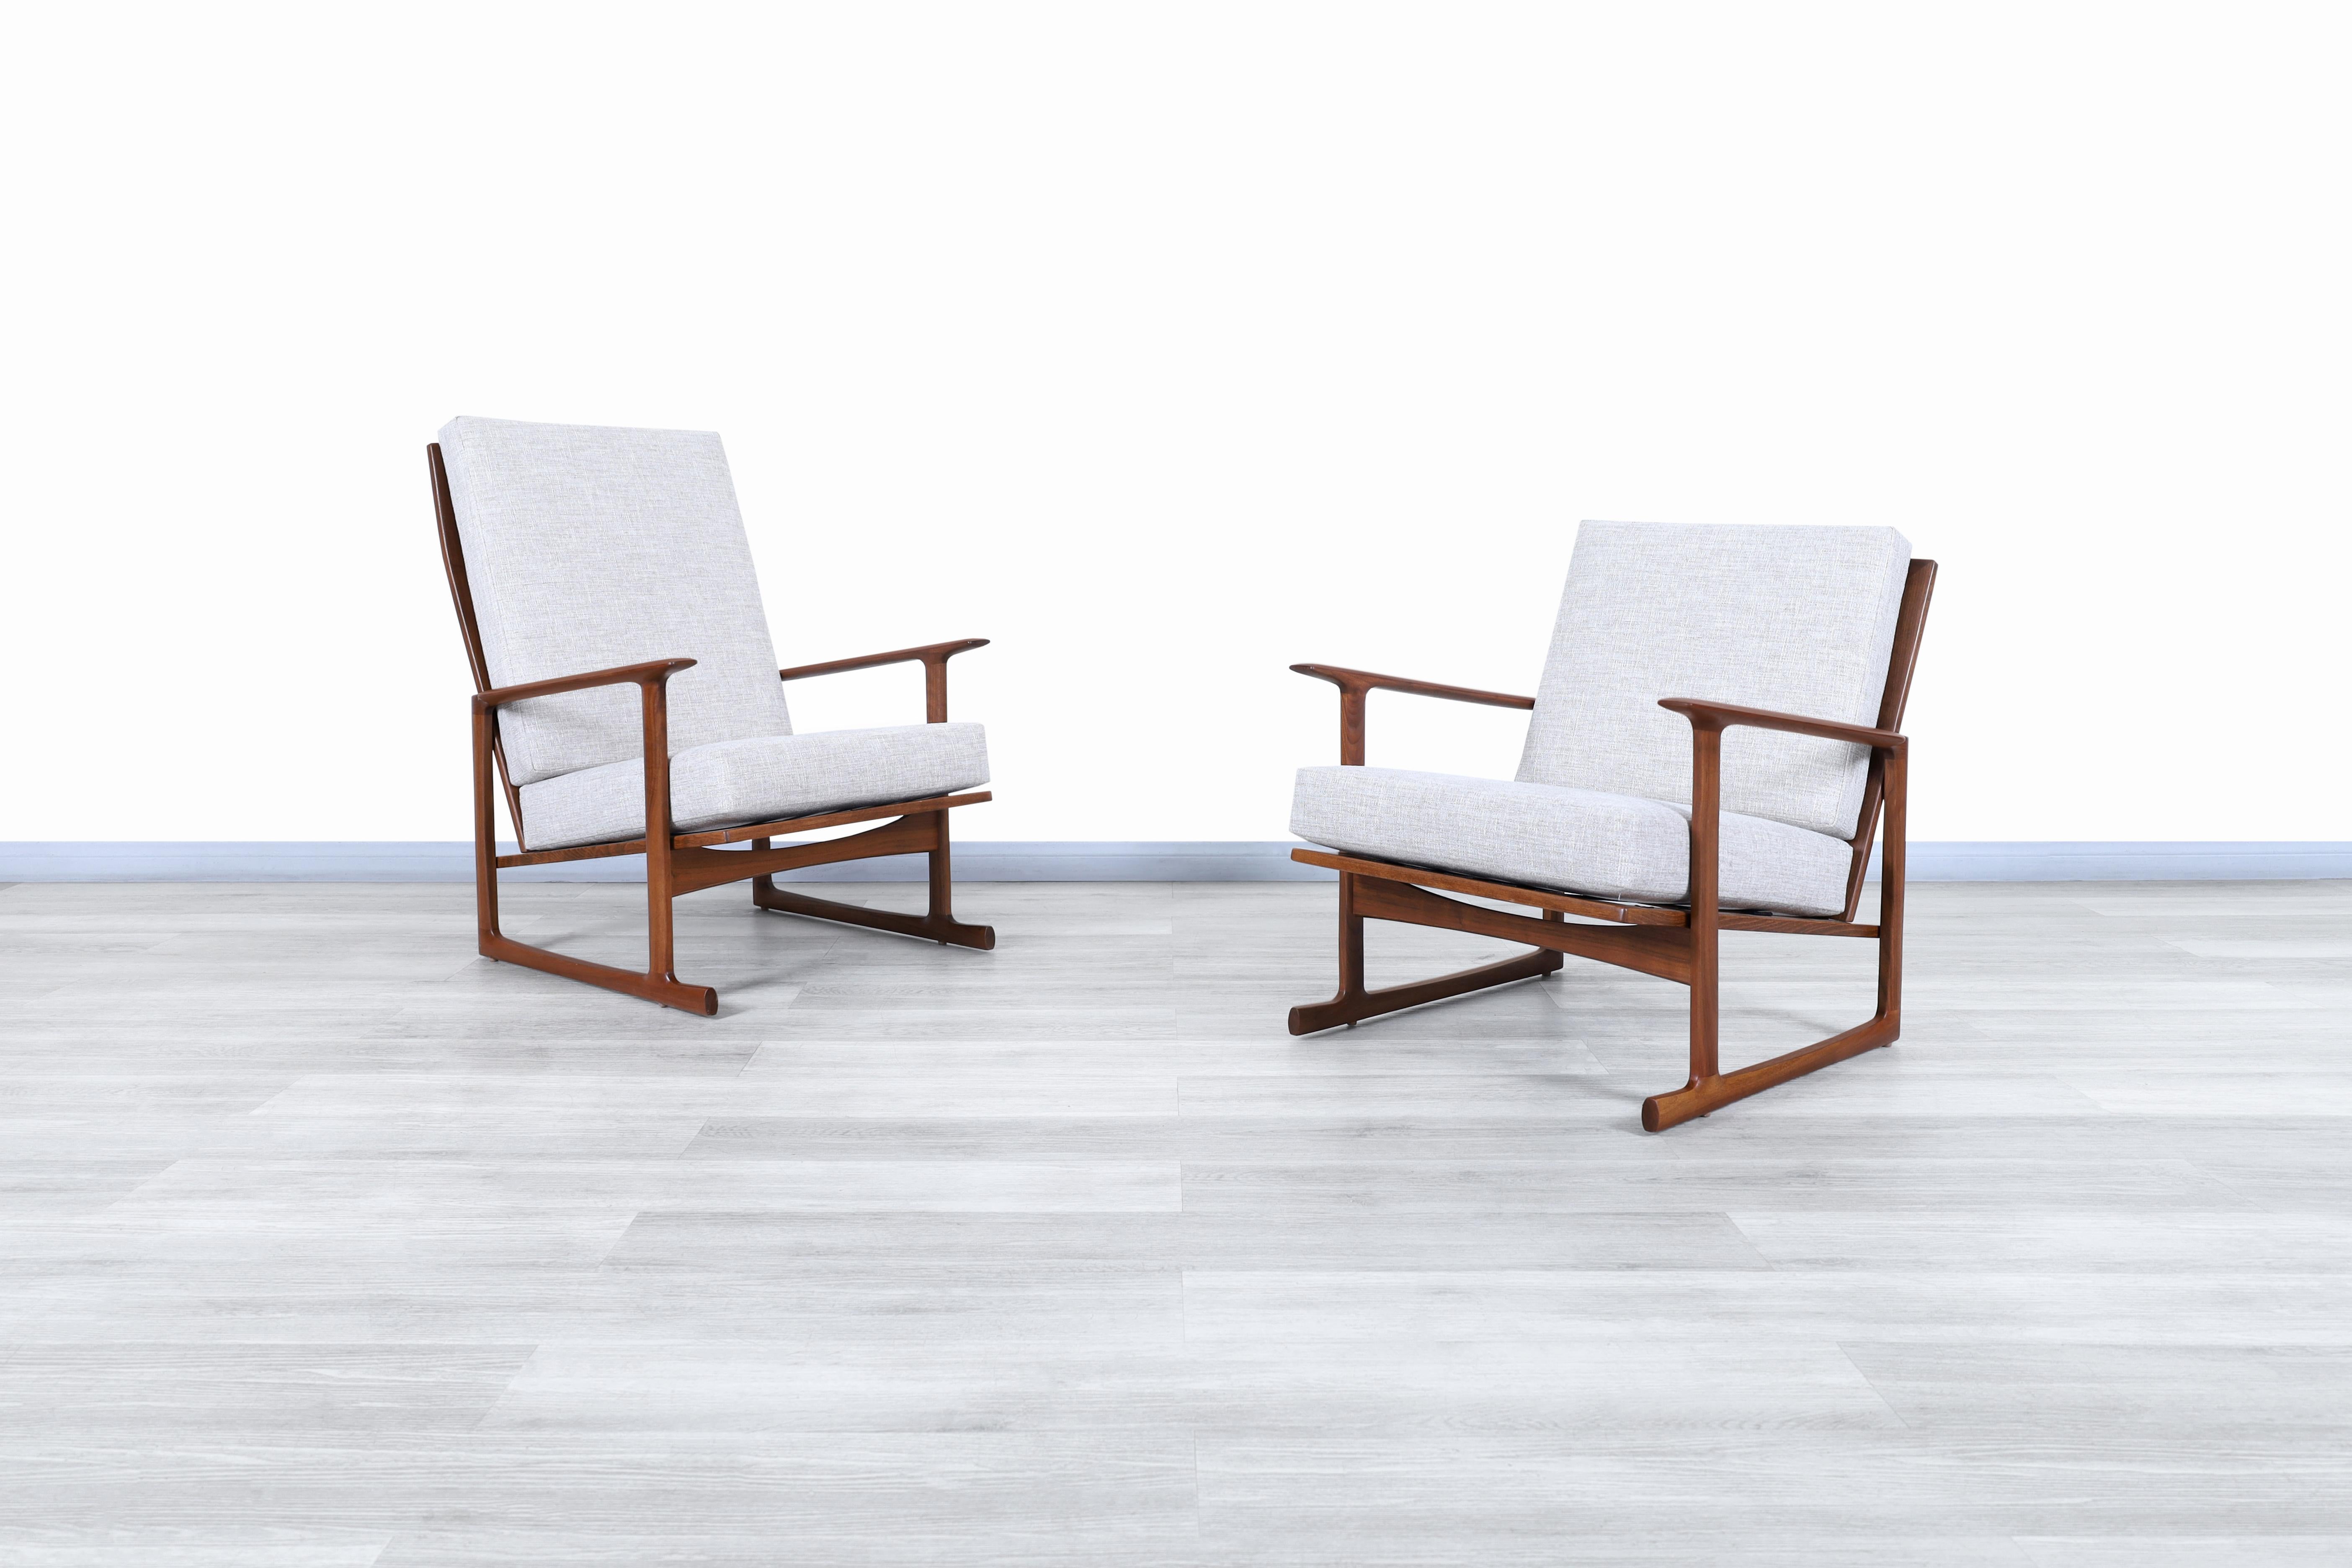 Wonderful Danish modern walnut lounge chairs by architect and furniture designer Ib Kofod for Selig in Denmark, circa 1960s. These chairs have an architectural design that focuses on user comfort and is complemented by the elegance of its